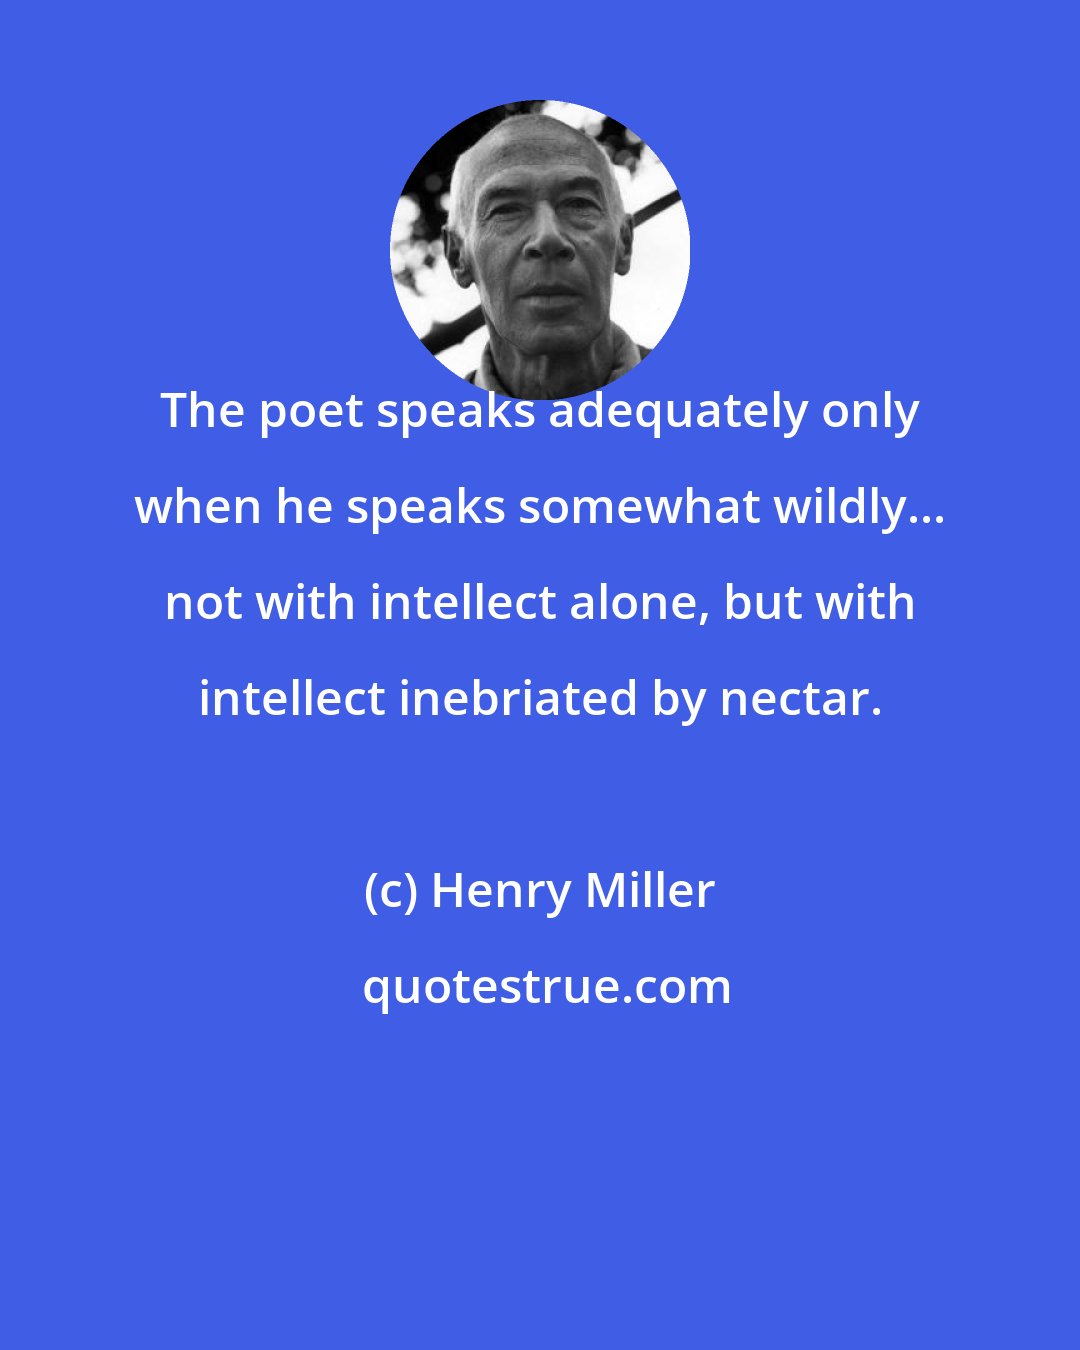 Henry Miller: The poet speaks adequately only when he speaks somewhat wildly... not with intellect alone, but with intellect inebriated by nectar.